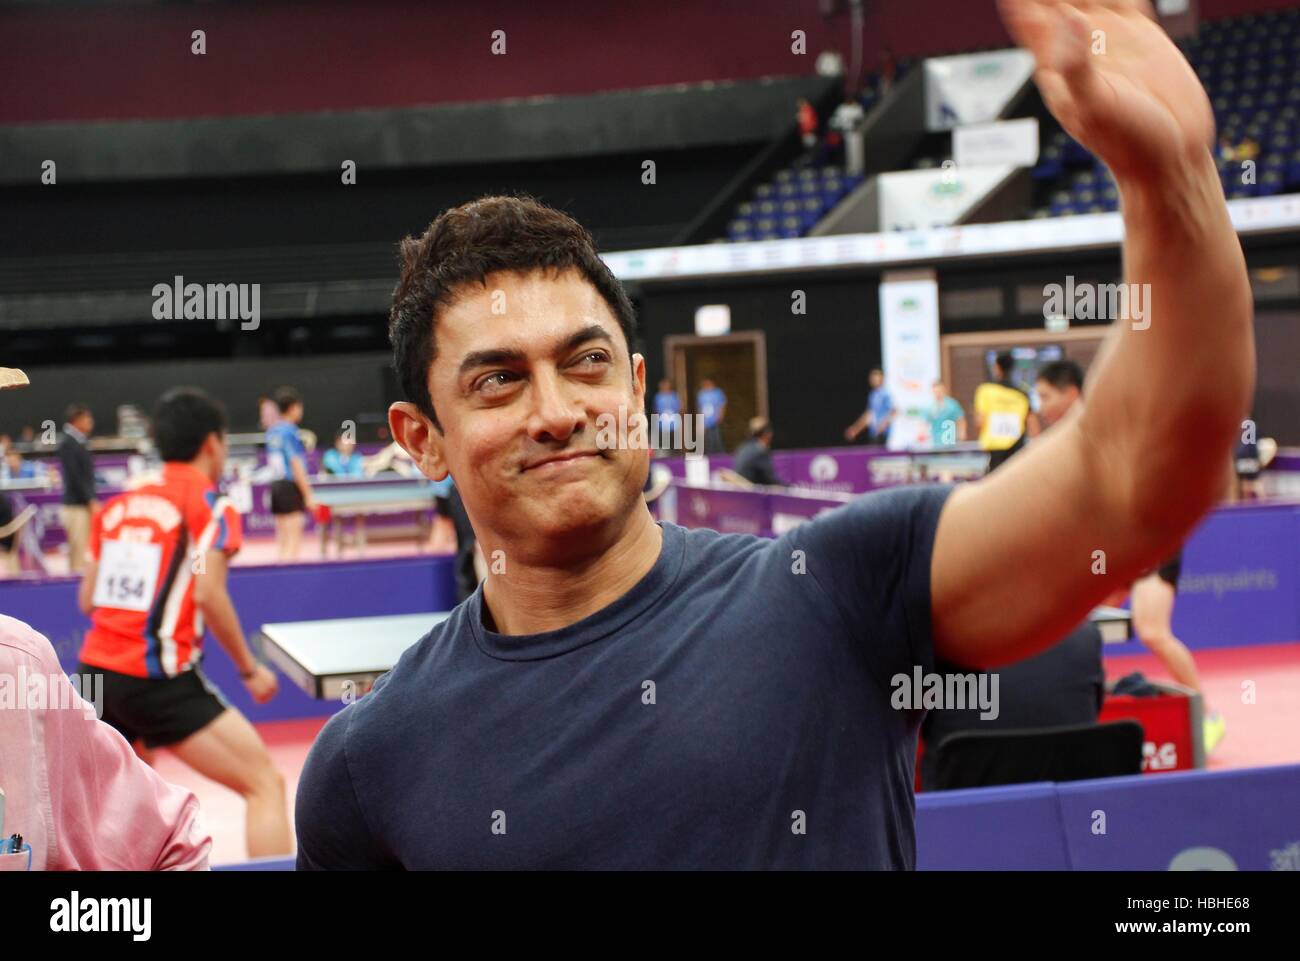 Bollywood actor Aamir Khan at the 20th Reliance Asian Junior & Cadet Table Tennis Championship in Mumbai, India - sms 355183 Stock Photo